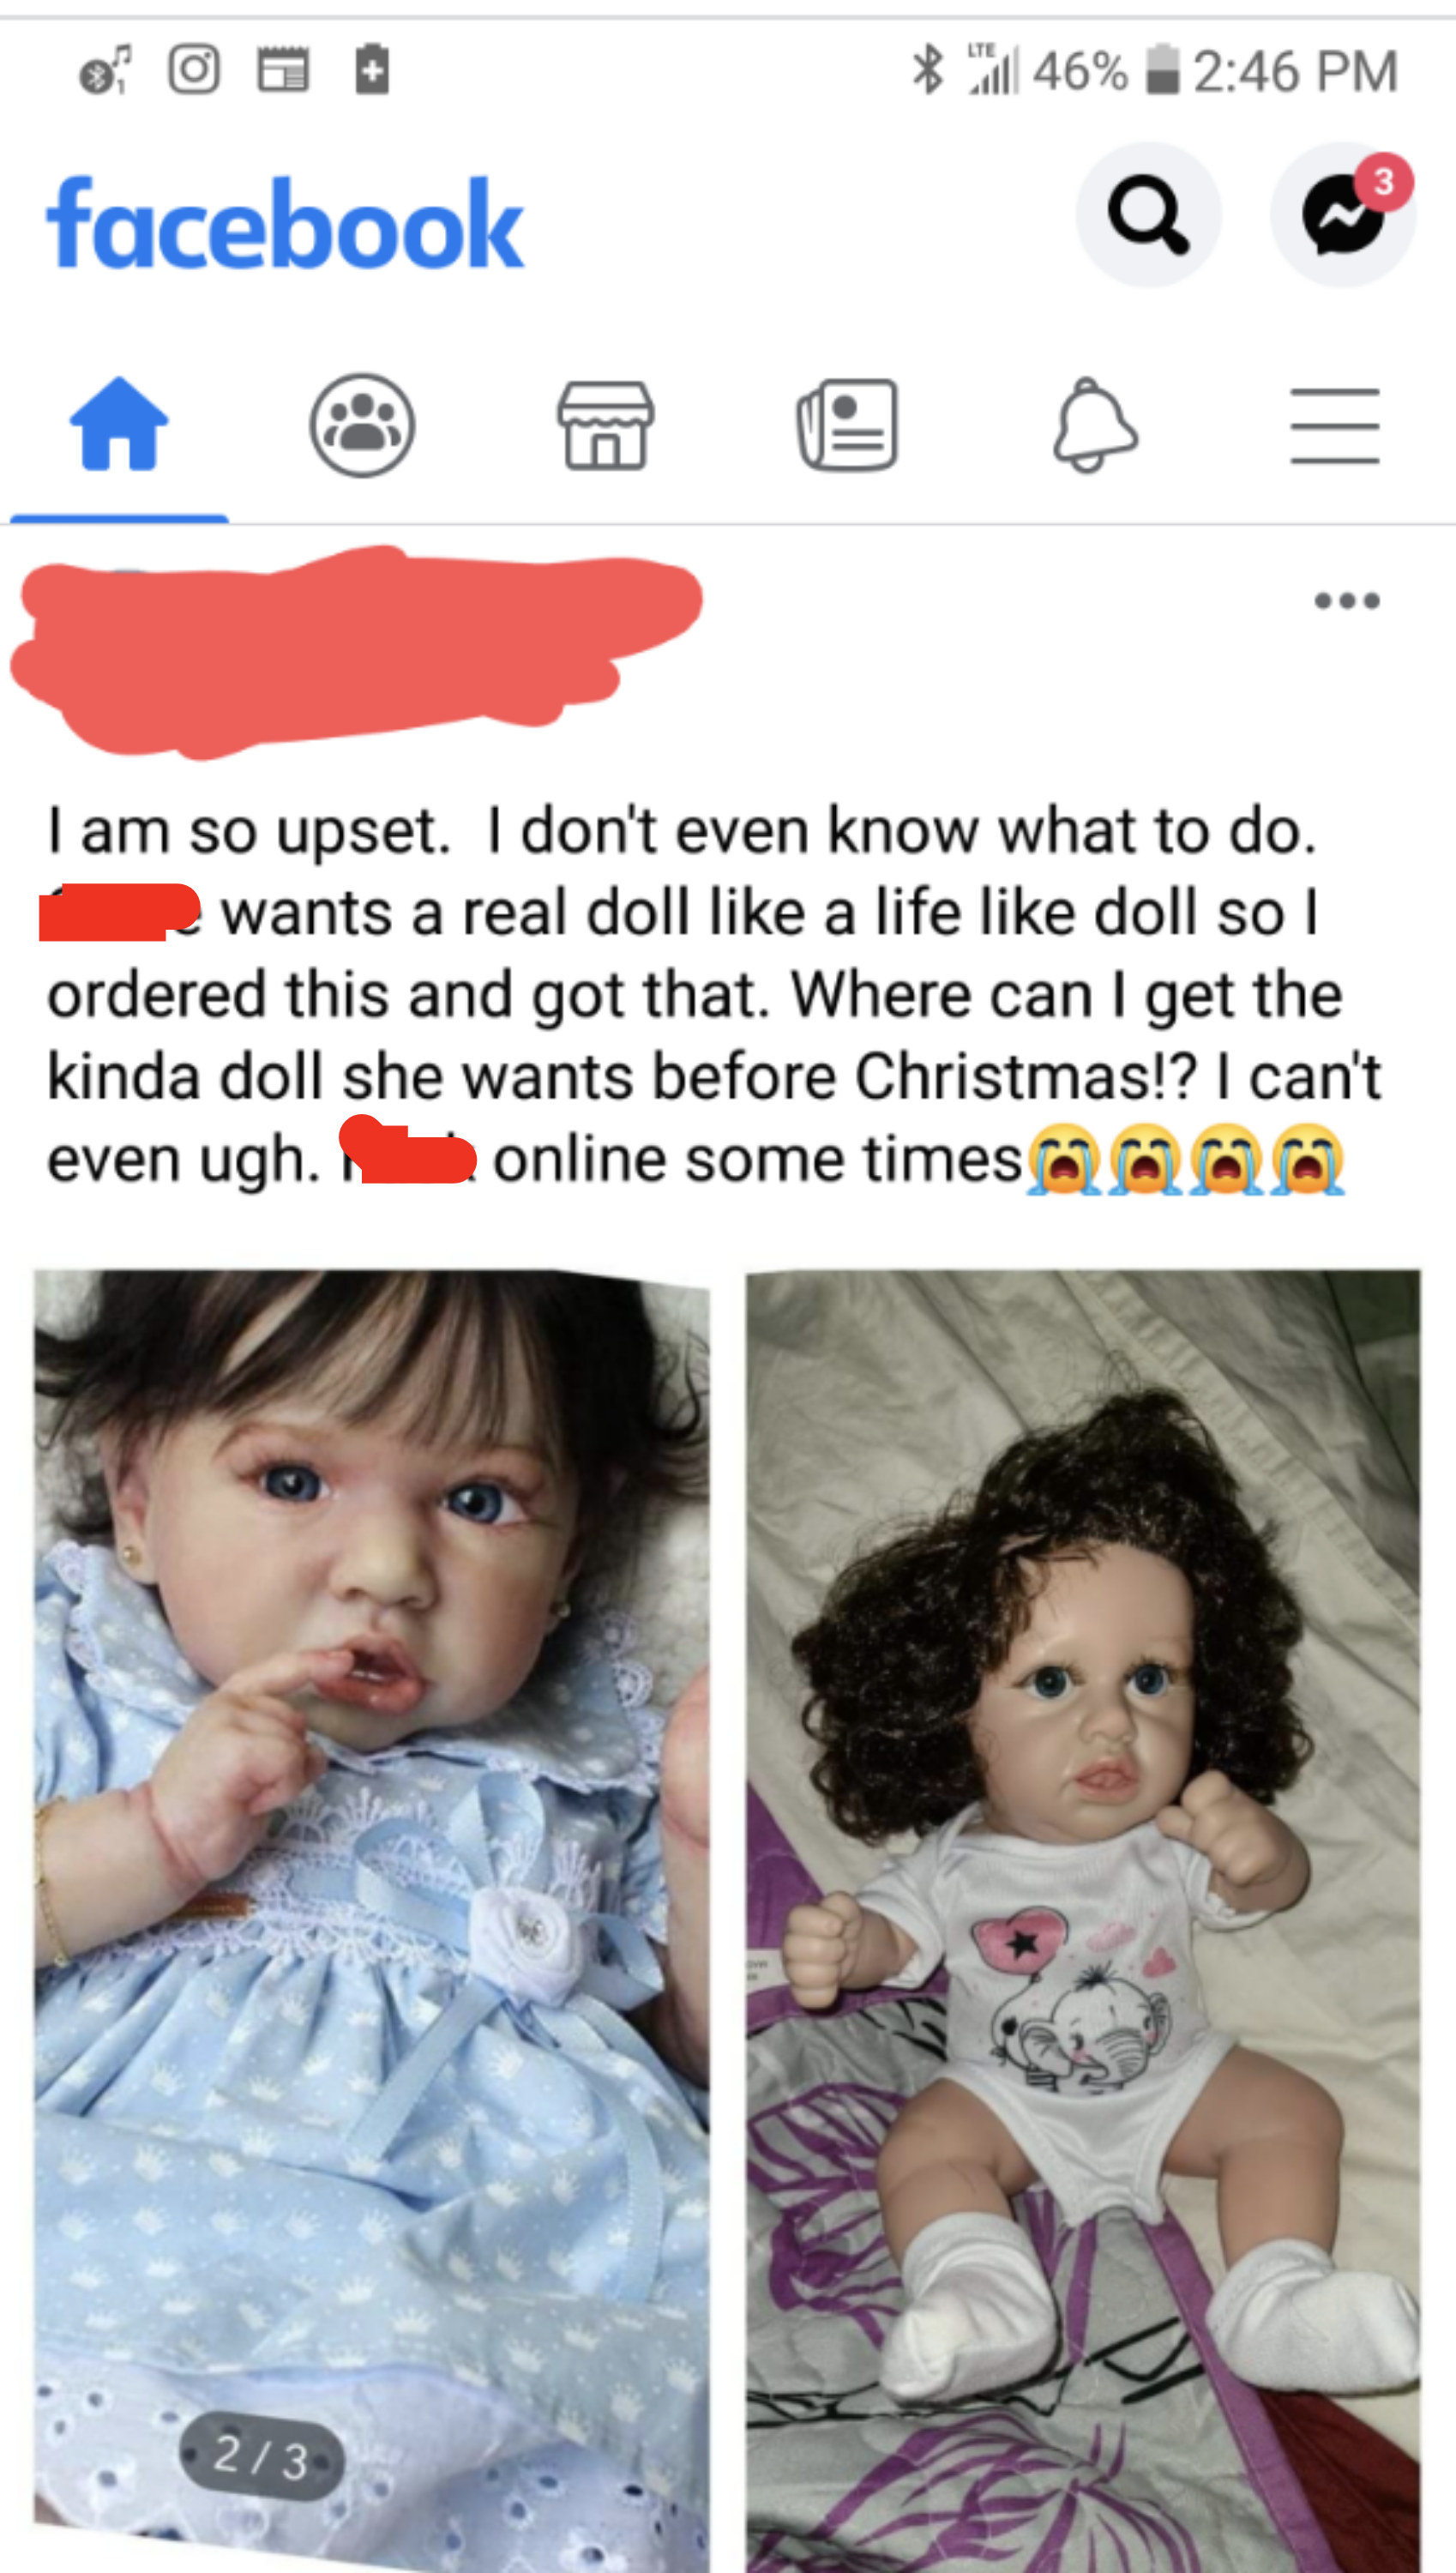 A lifelike doll on the left and a smaller doll with longer hair and looking much older on the right